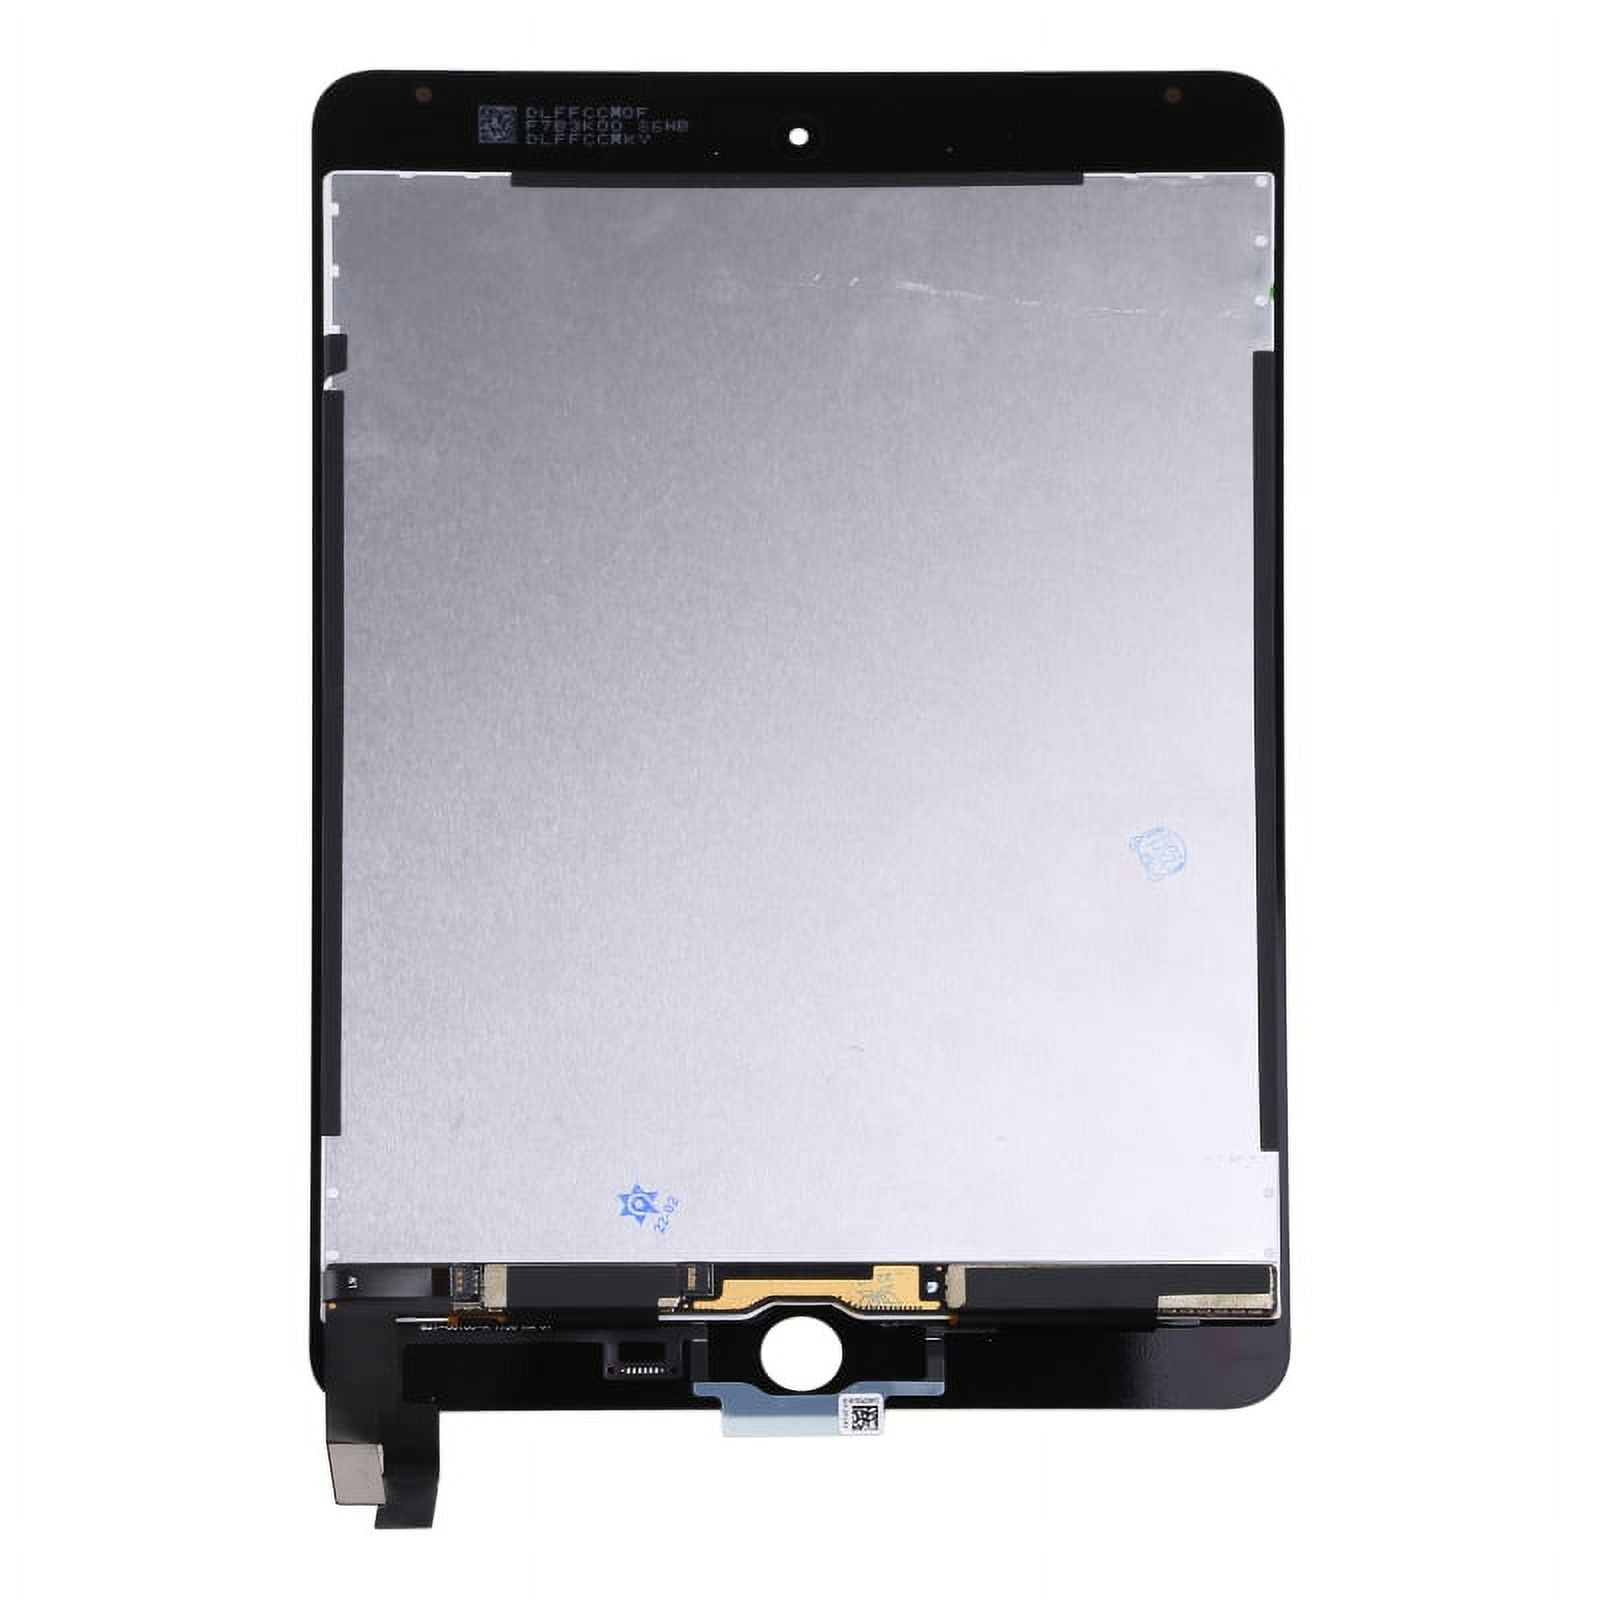 HOYRTDE 7.9 Screen Replacement for iPad Mini 4 A1538 A1550 LCD Display  Glass Touch Digitizer Premium Kit with Tools - White